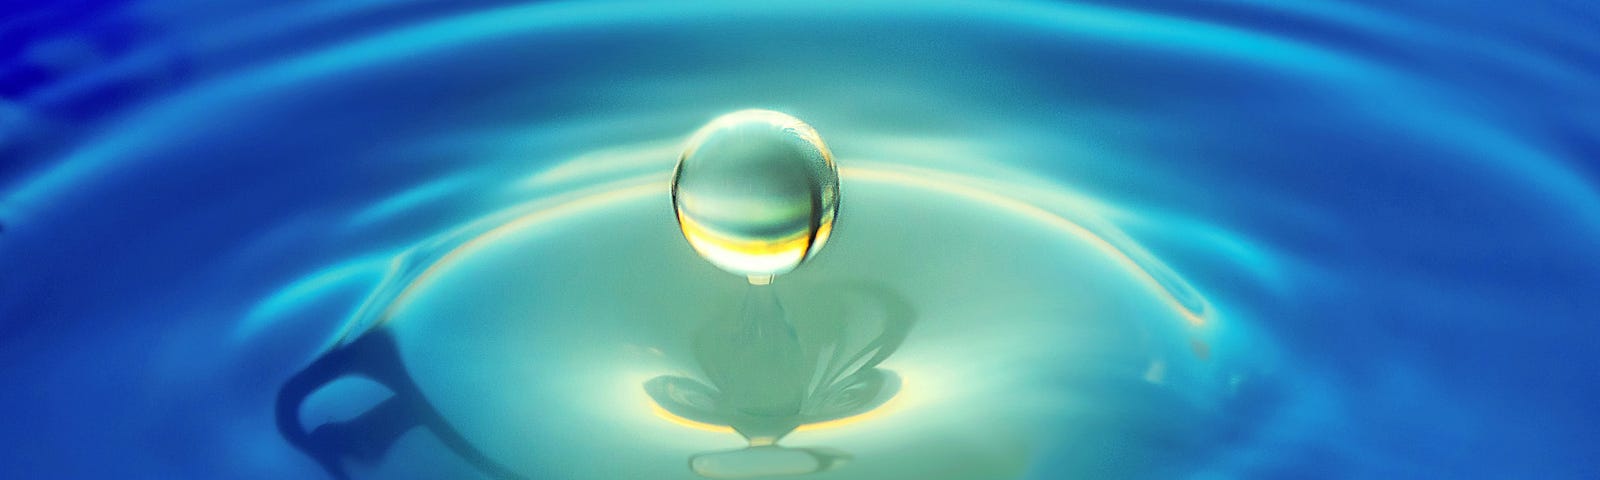 A droplet of water hovering over blue green water illustrating bitterness